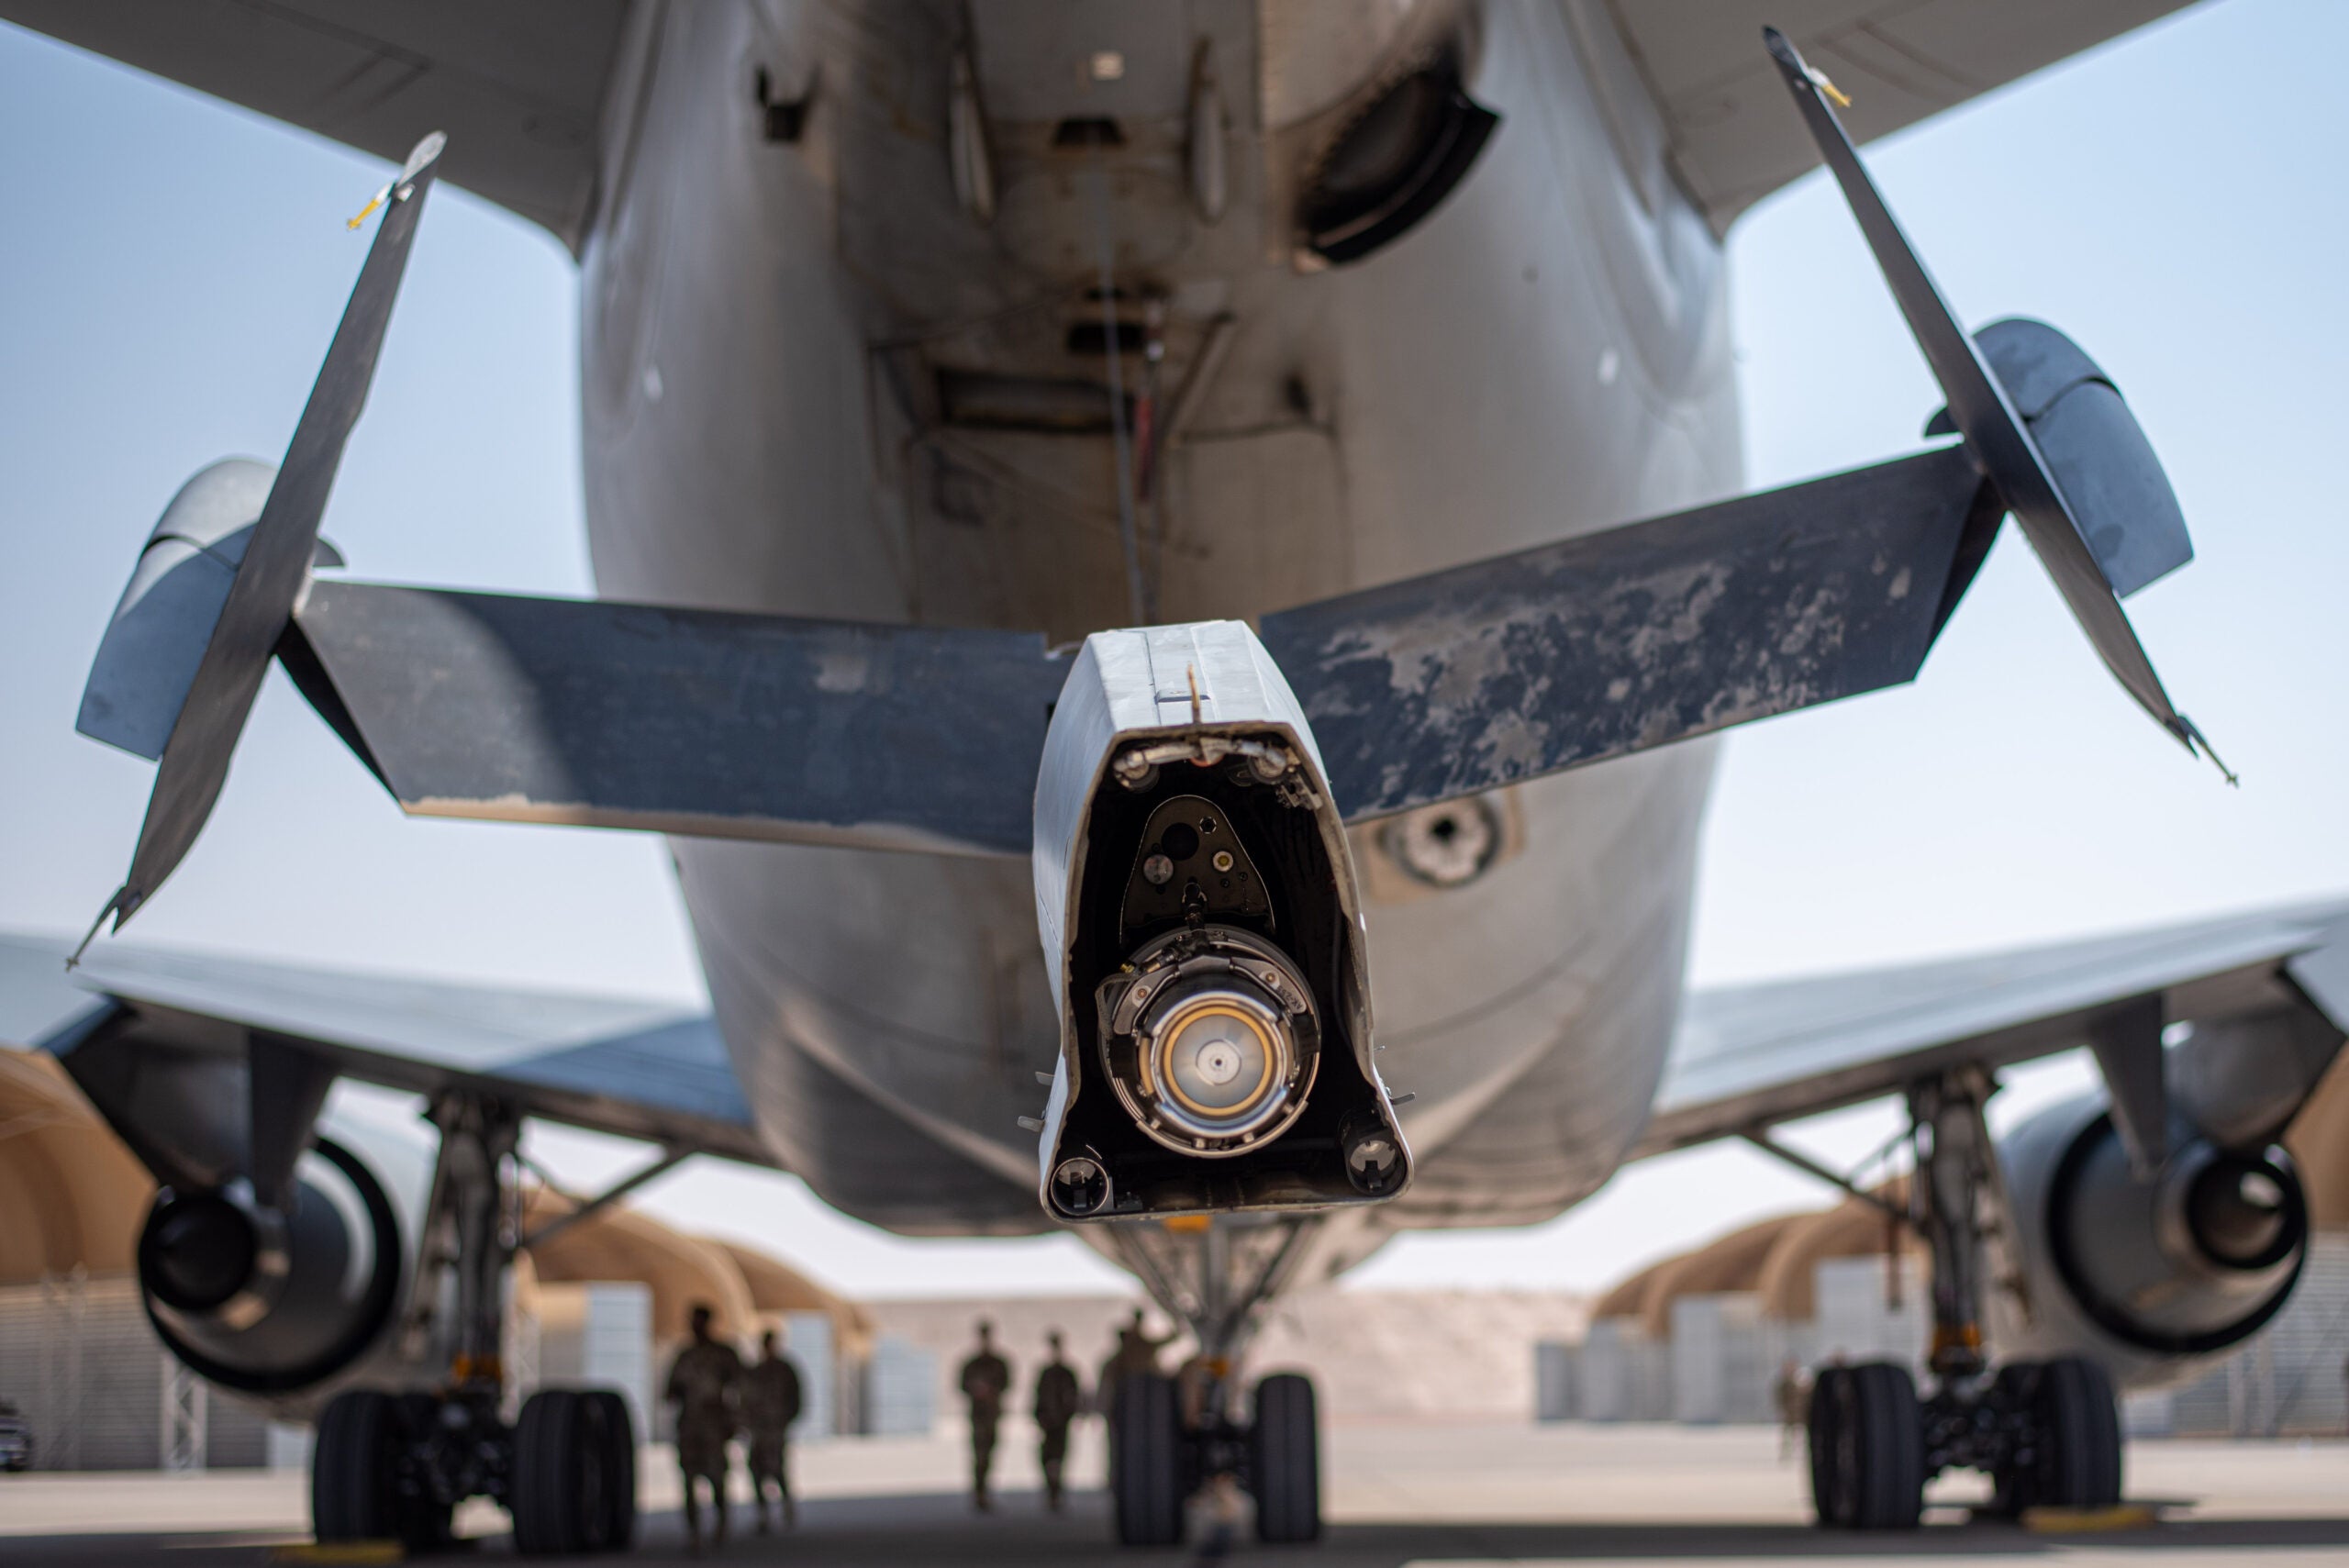 The boom of a KC-10 Extender sits on display after an inactivation ceremony for the 908th Expeditionary Air Refueling Squadron at Prince Sultan Air Base, Kingdom of Saudi Arabia, Oct. 4, 2023. The ceremony highlighted the legacy of the KC-10 after over 30 years of service within the U.S. Air Forces Central (AFCENT) Area of Responsibility. By September 2024, the U.S. Air Force's fleet of KC-10s will be decommissioned and gradually replaced by the KC-46 aircraft. (U.S. Air Force photo by Tech. Sgt. Alexander Frank)